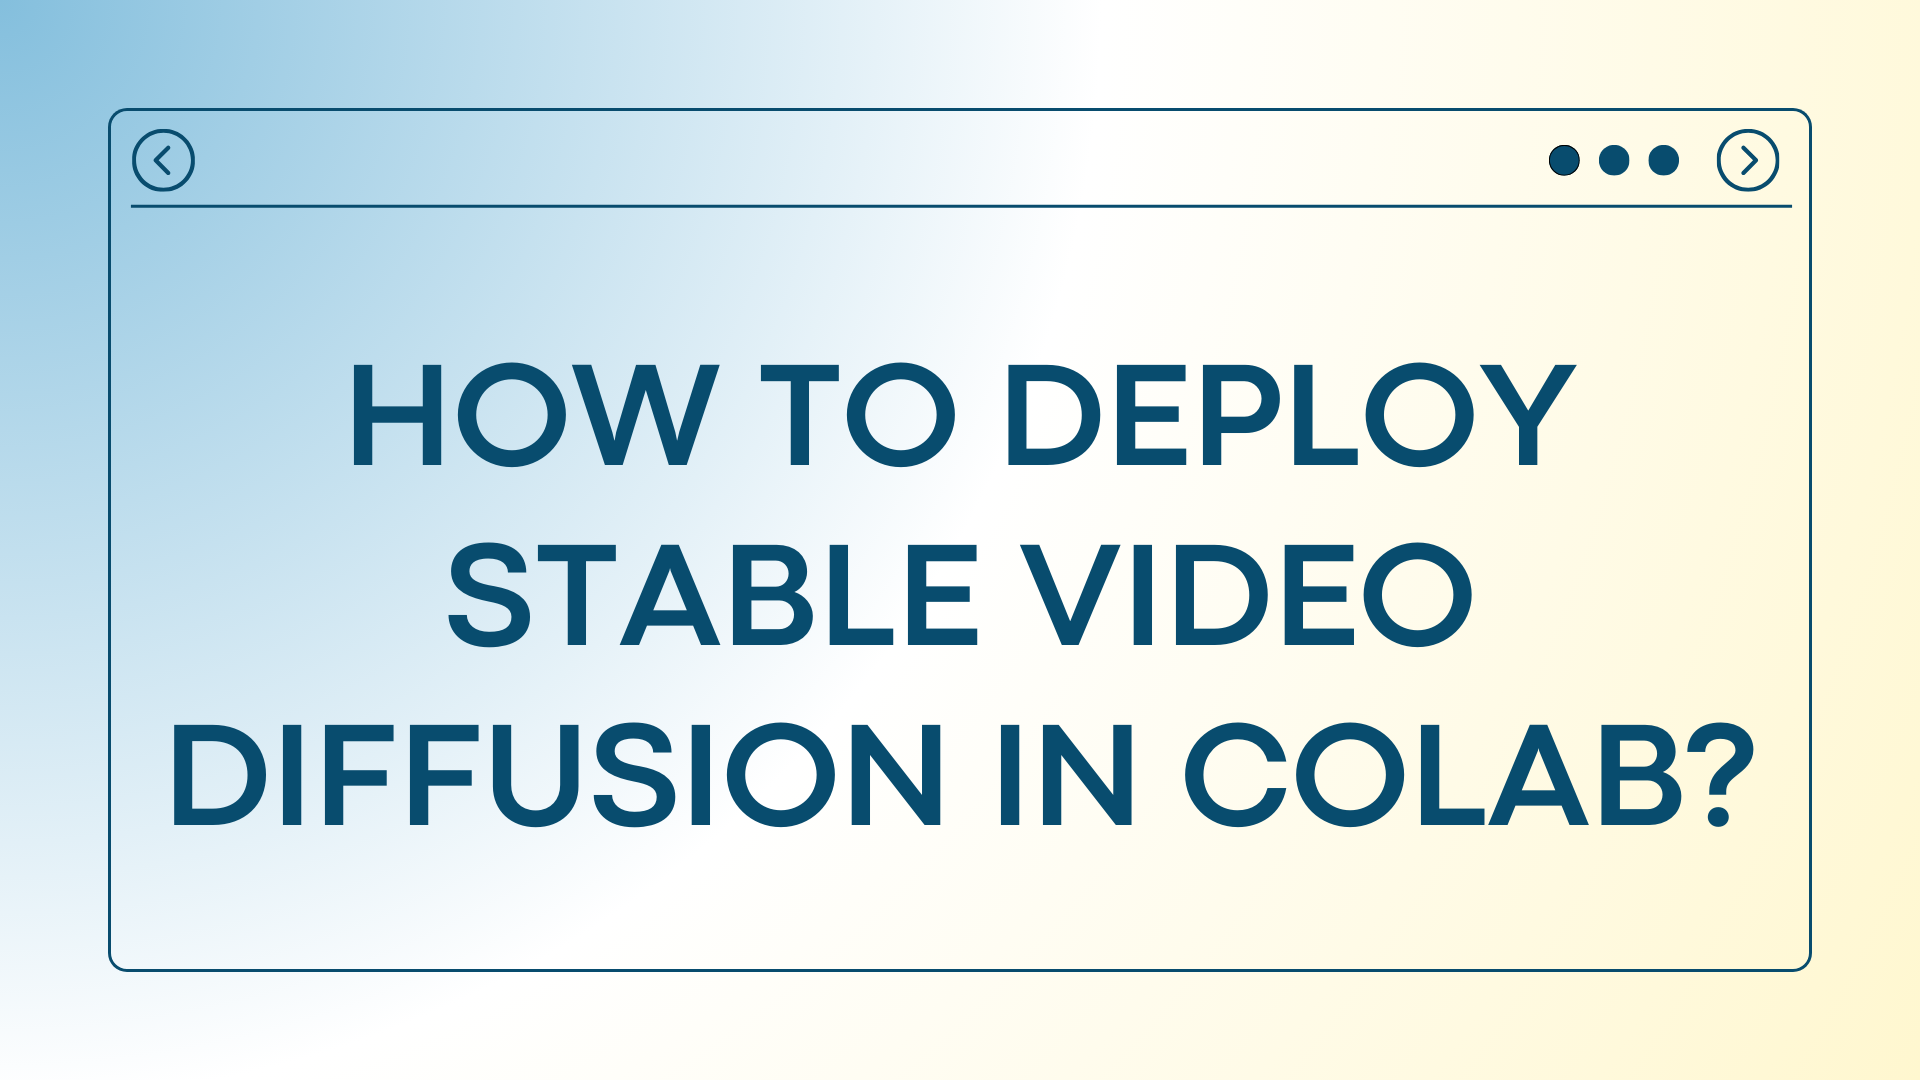 Cover Image for How to Deploy Stable Video Diffusion in Colab?